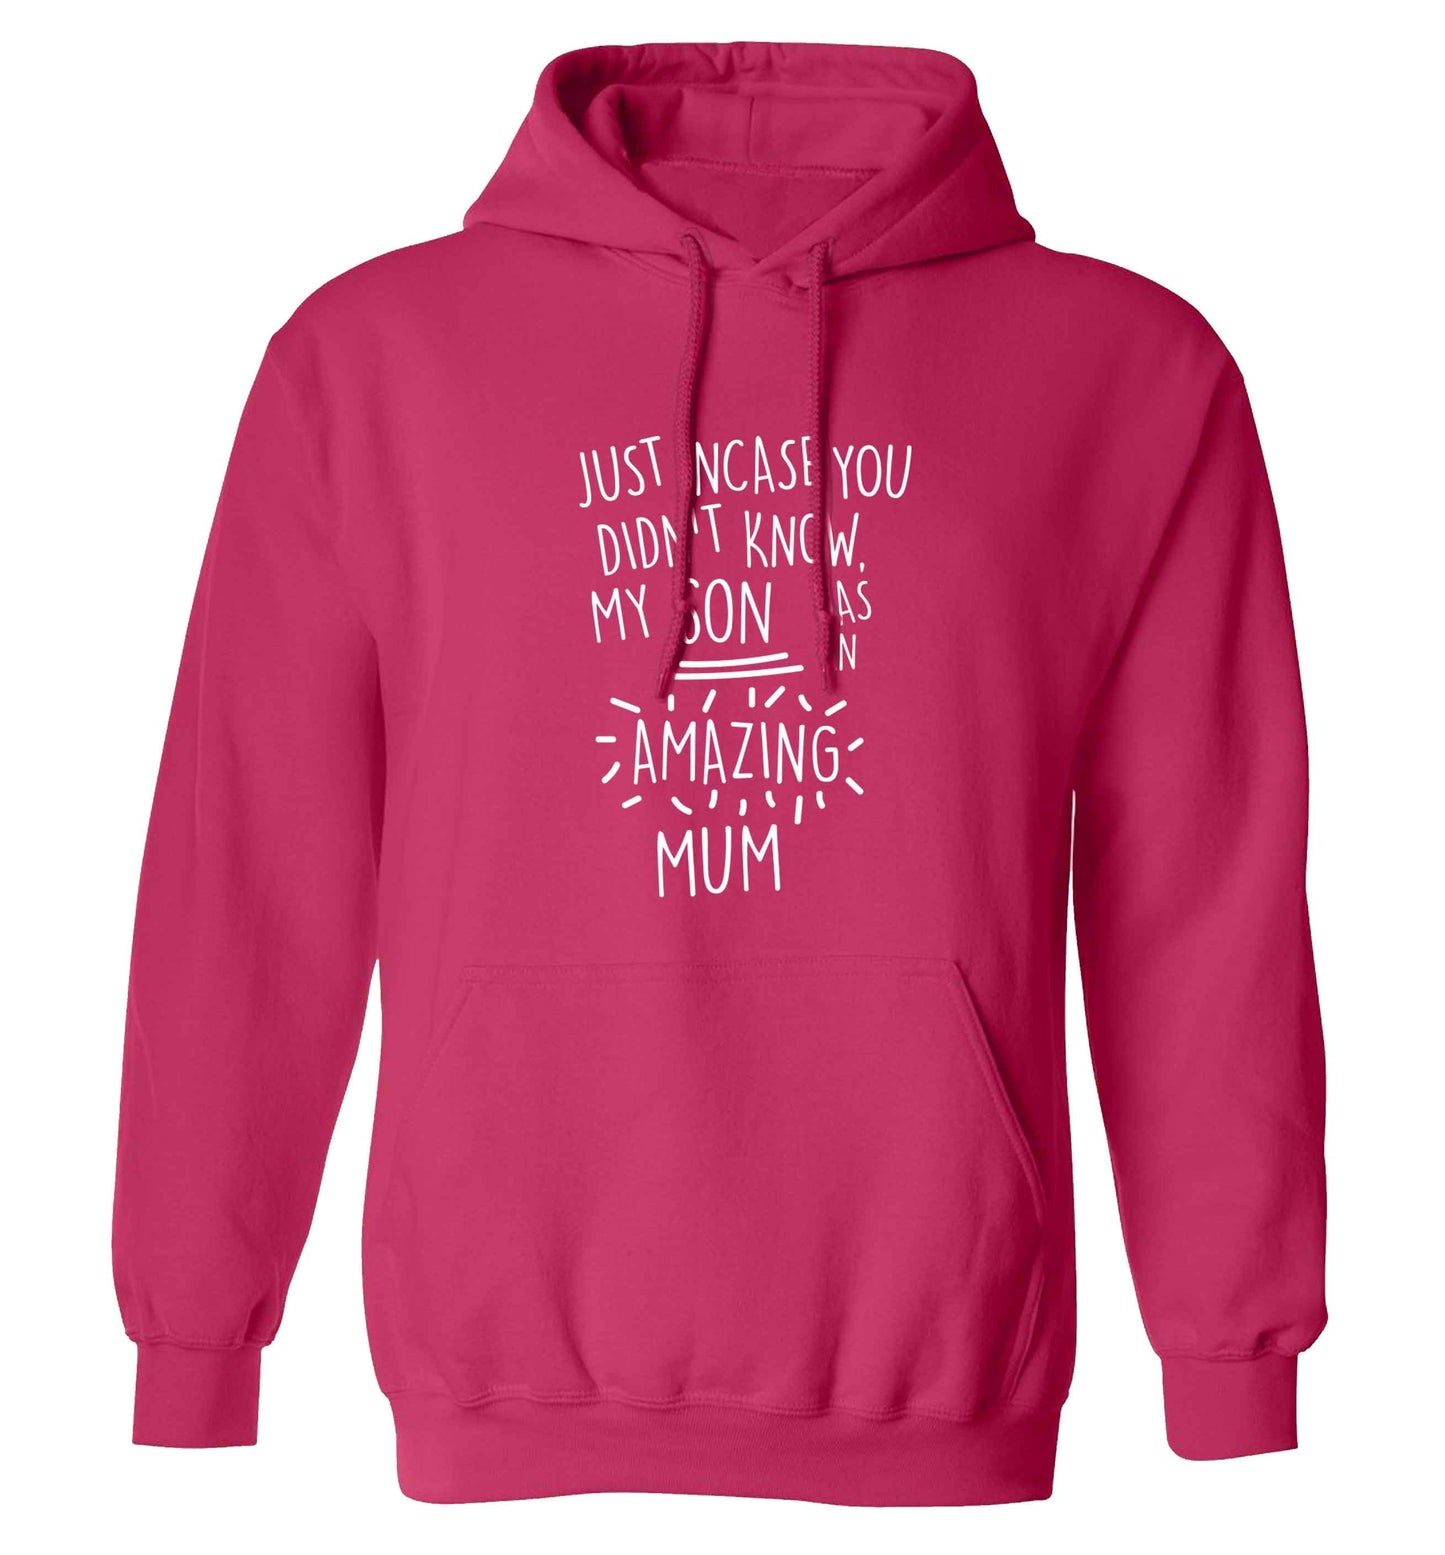 Just incase you didn't know my son has an amazing mum adults unisex pink hoodie 2XL